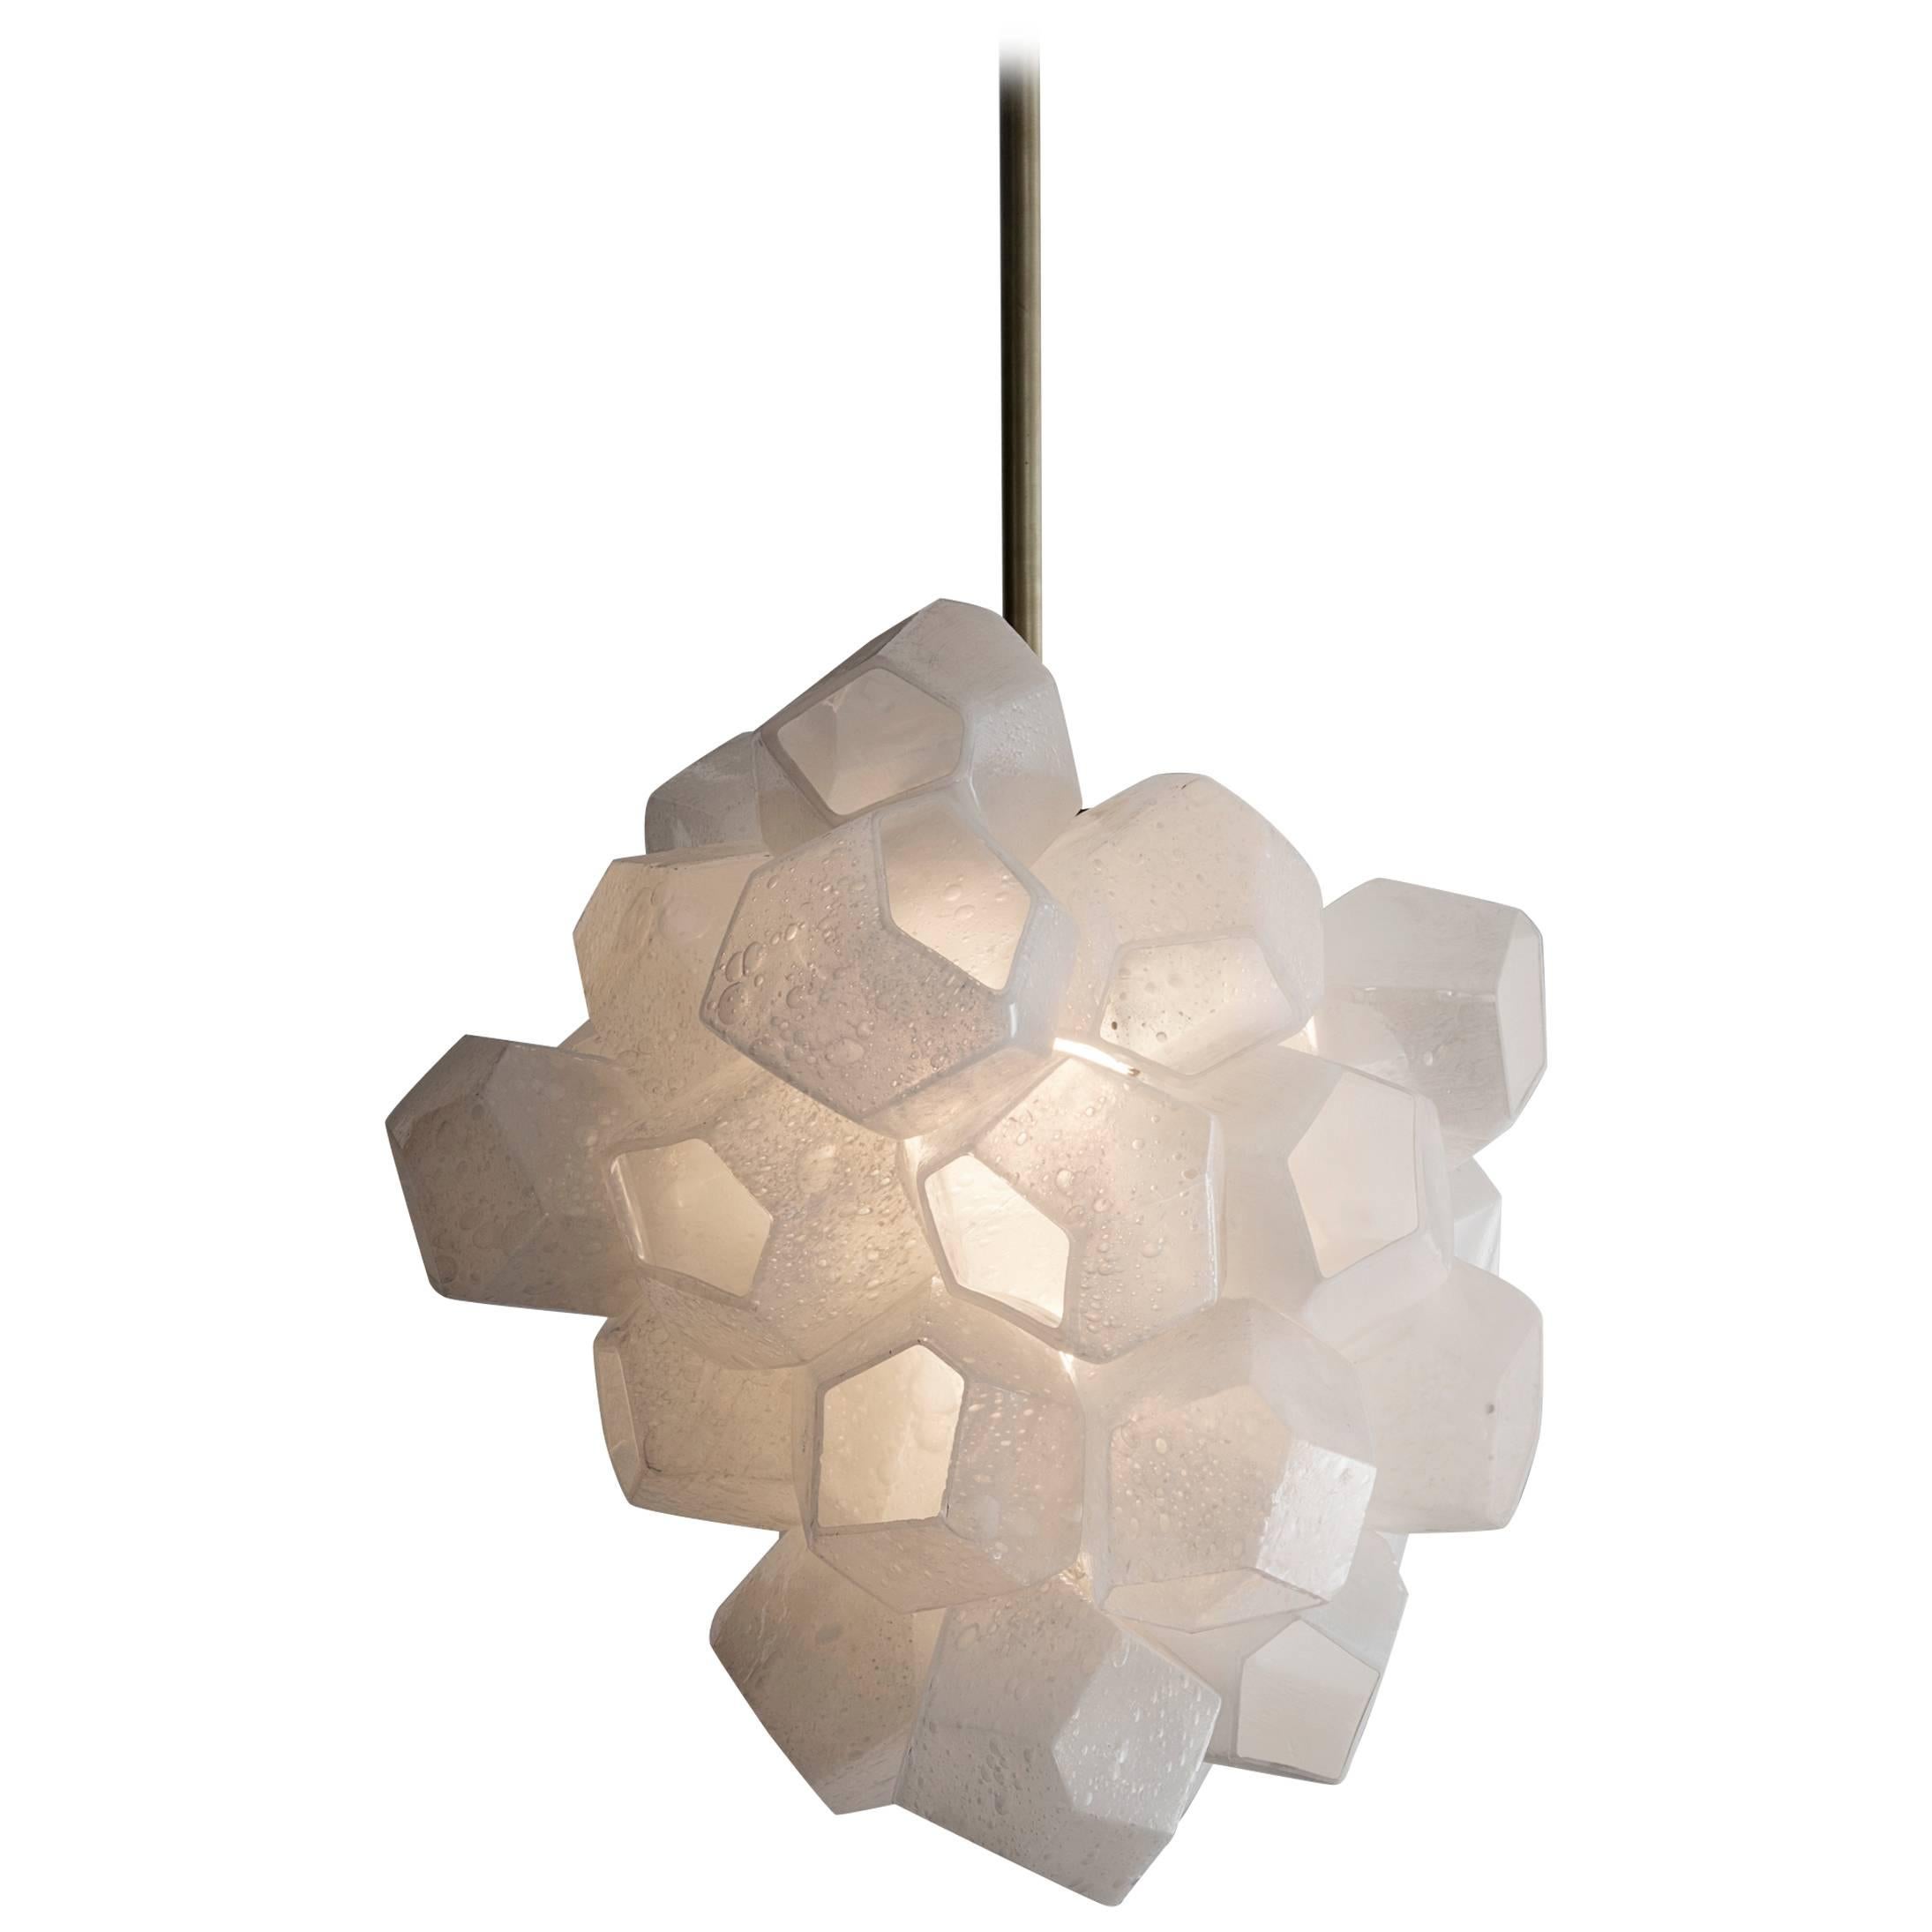 Illuminated Faceted Cluster Sculpture by Jeff Zimmerman, 2015 For Sale